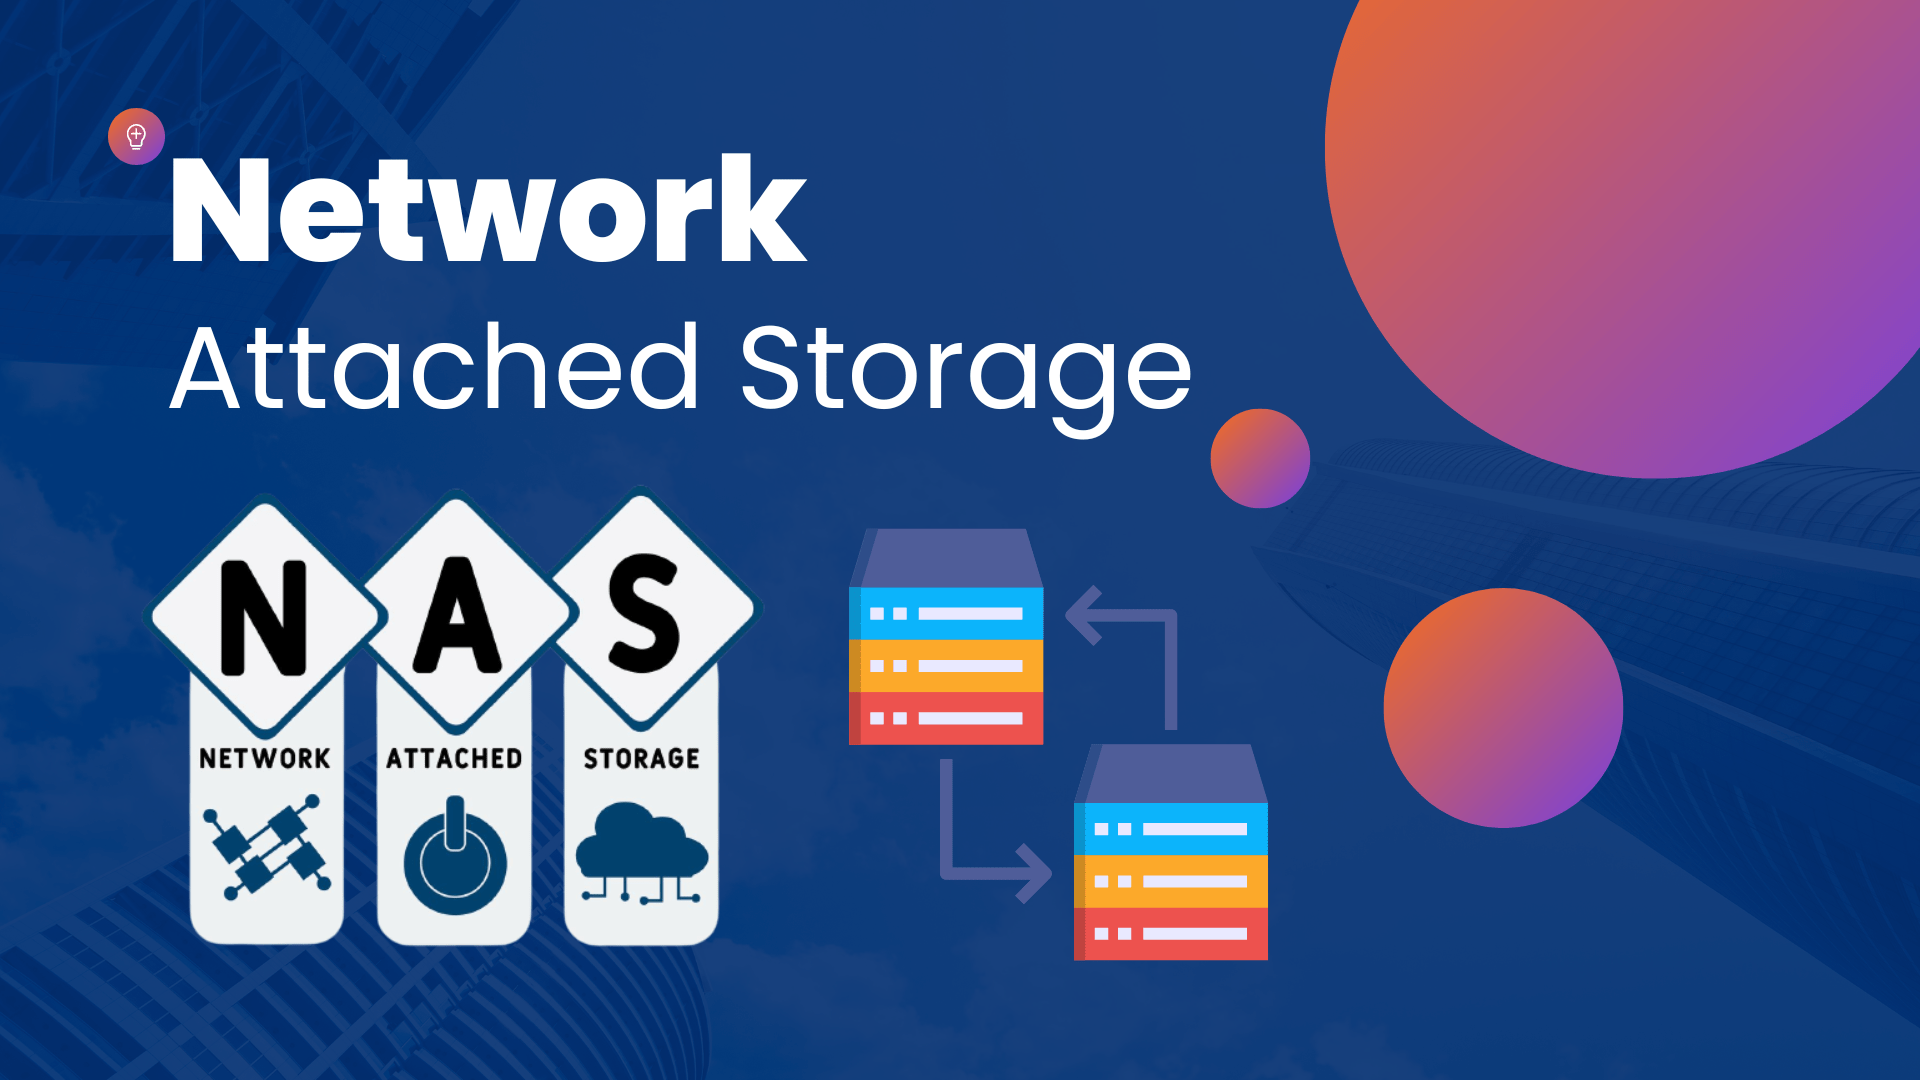 How does NAS compare to other storage network architectures?